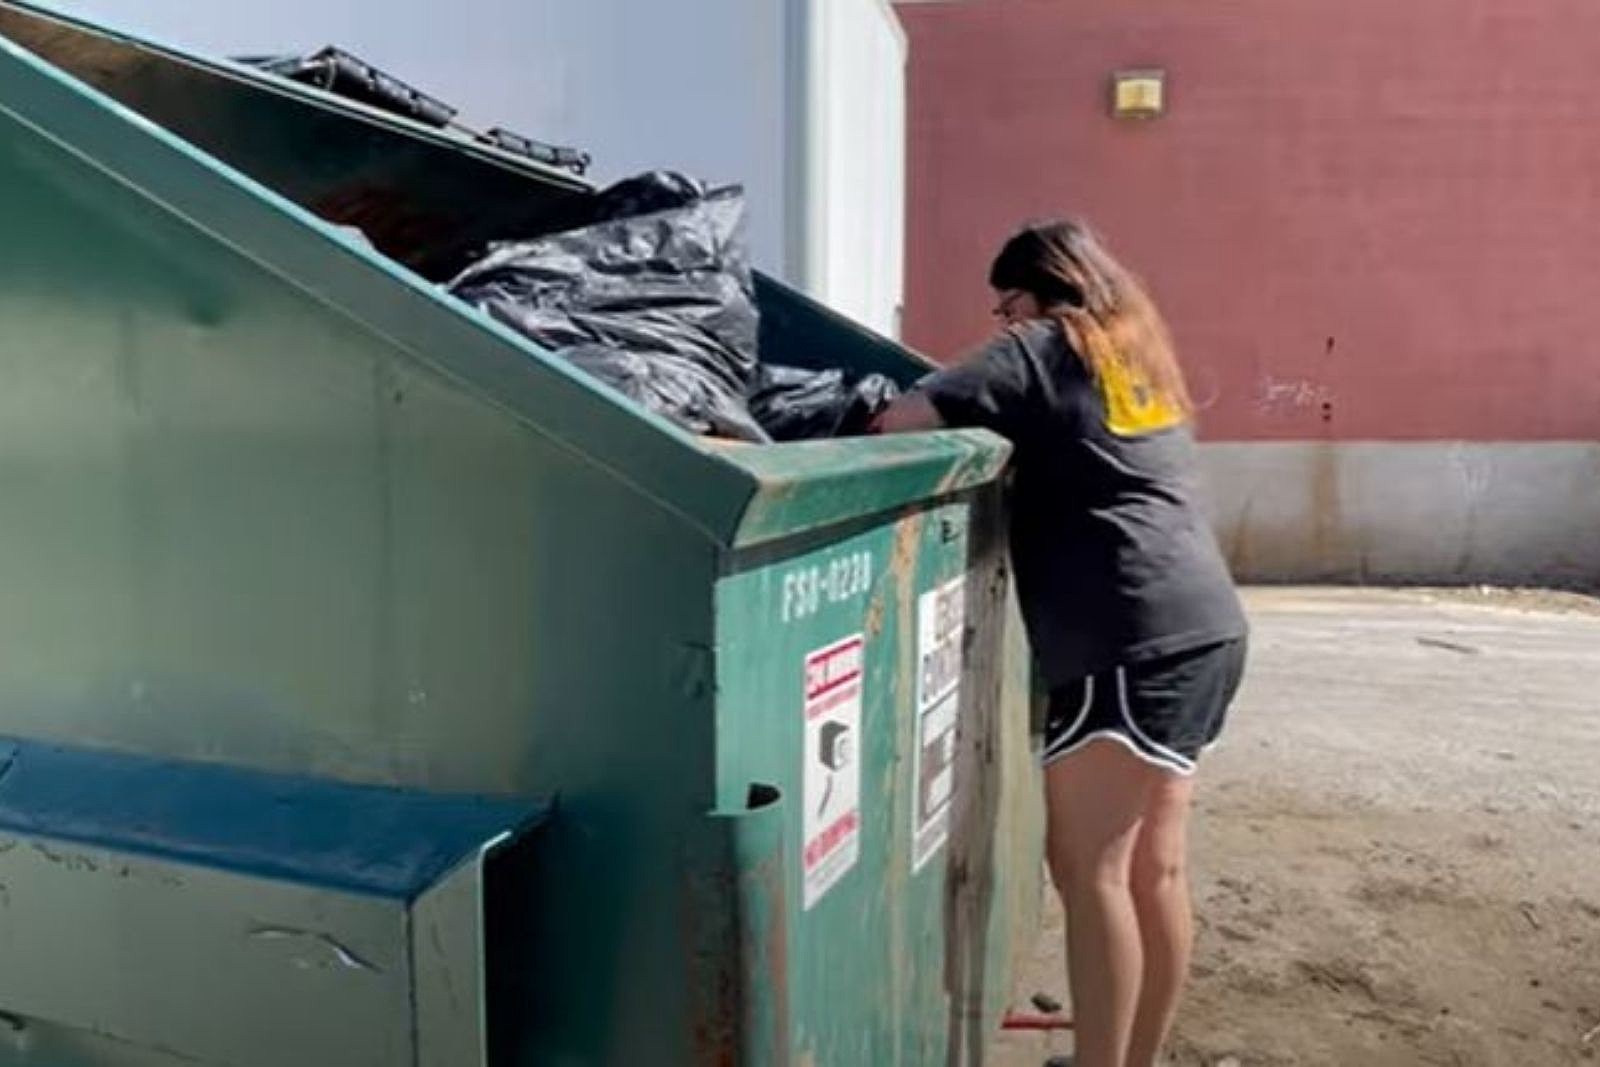 Is It Illegal to Dumpster Dive in Iowa? Here’s What the Law Says